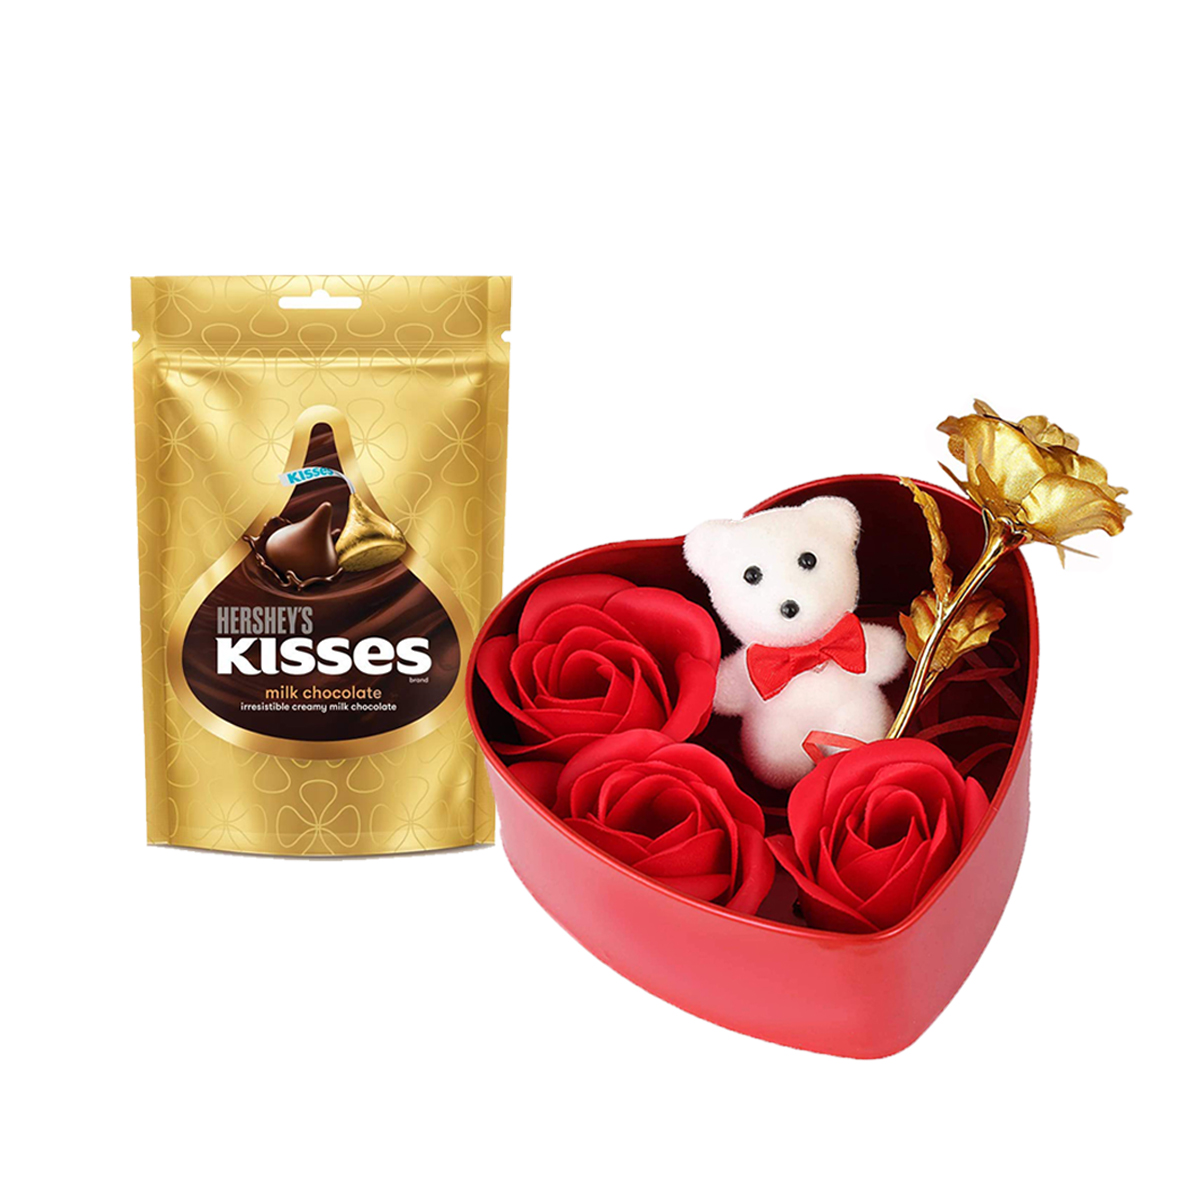 Buy Midiron Love Combo Gift for Girlfriend, Wife, Husband, Boyfriend|  Beautiful Chocolate Gift Valentine's Day, Anniversary, Birthday|Valentine's  Day Gift | Gift Pack Handmade Chocolates, Artificial Rose, Valentine's Day  Greeting Card Online at Best Prices ...